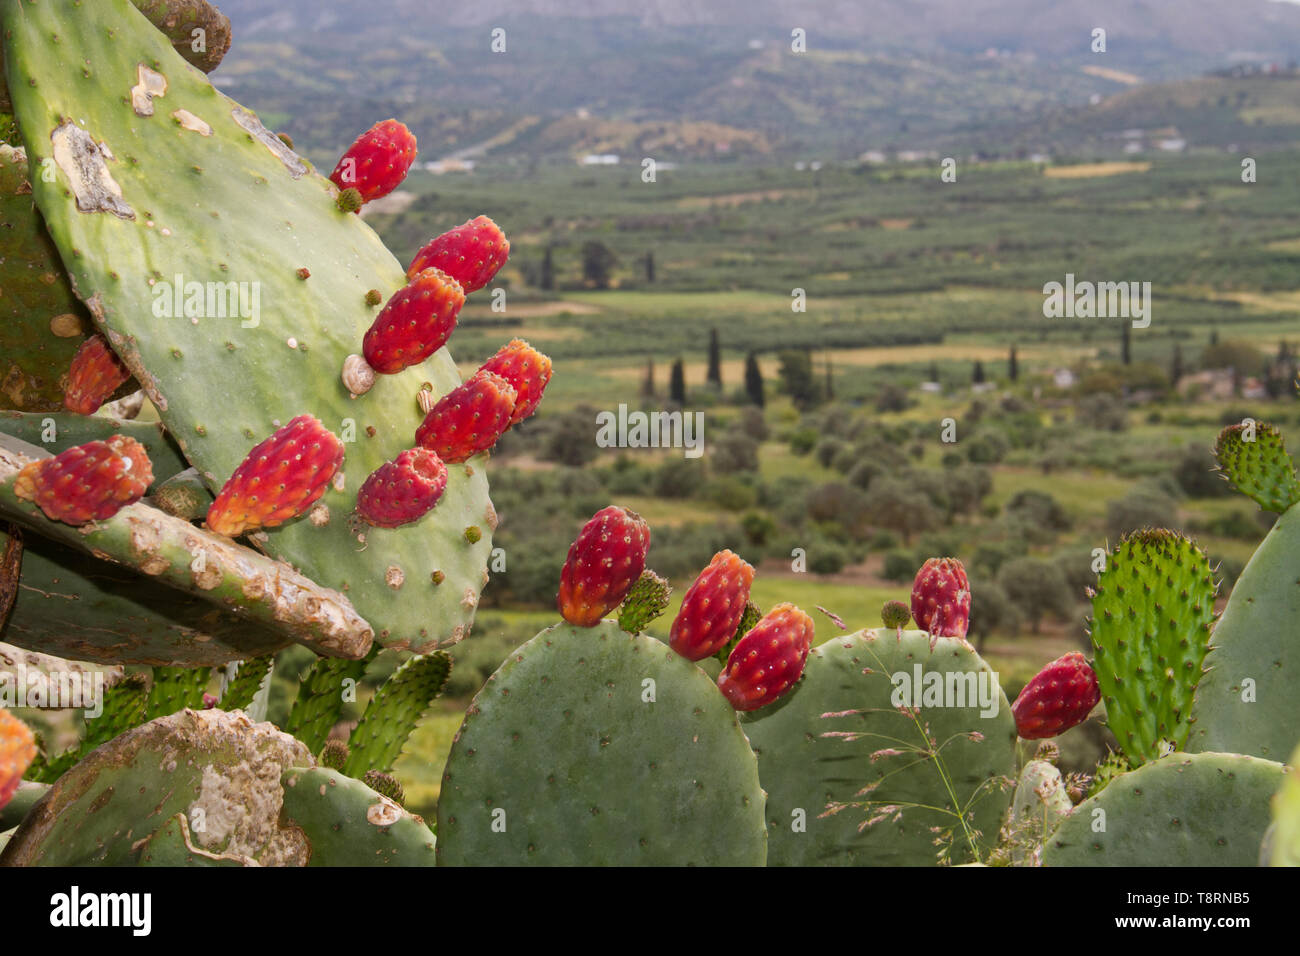 Opuntia ficus-indica, Prickly pear, in a Greek landscape Stock Photo